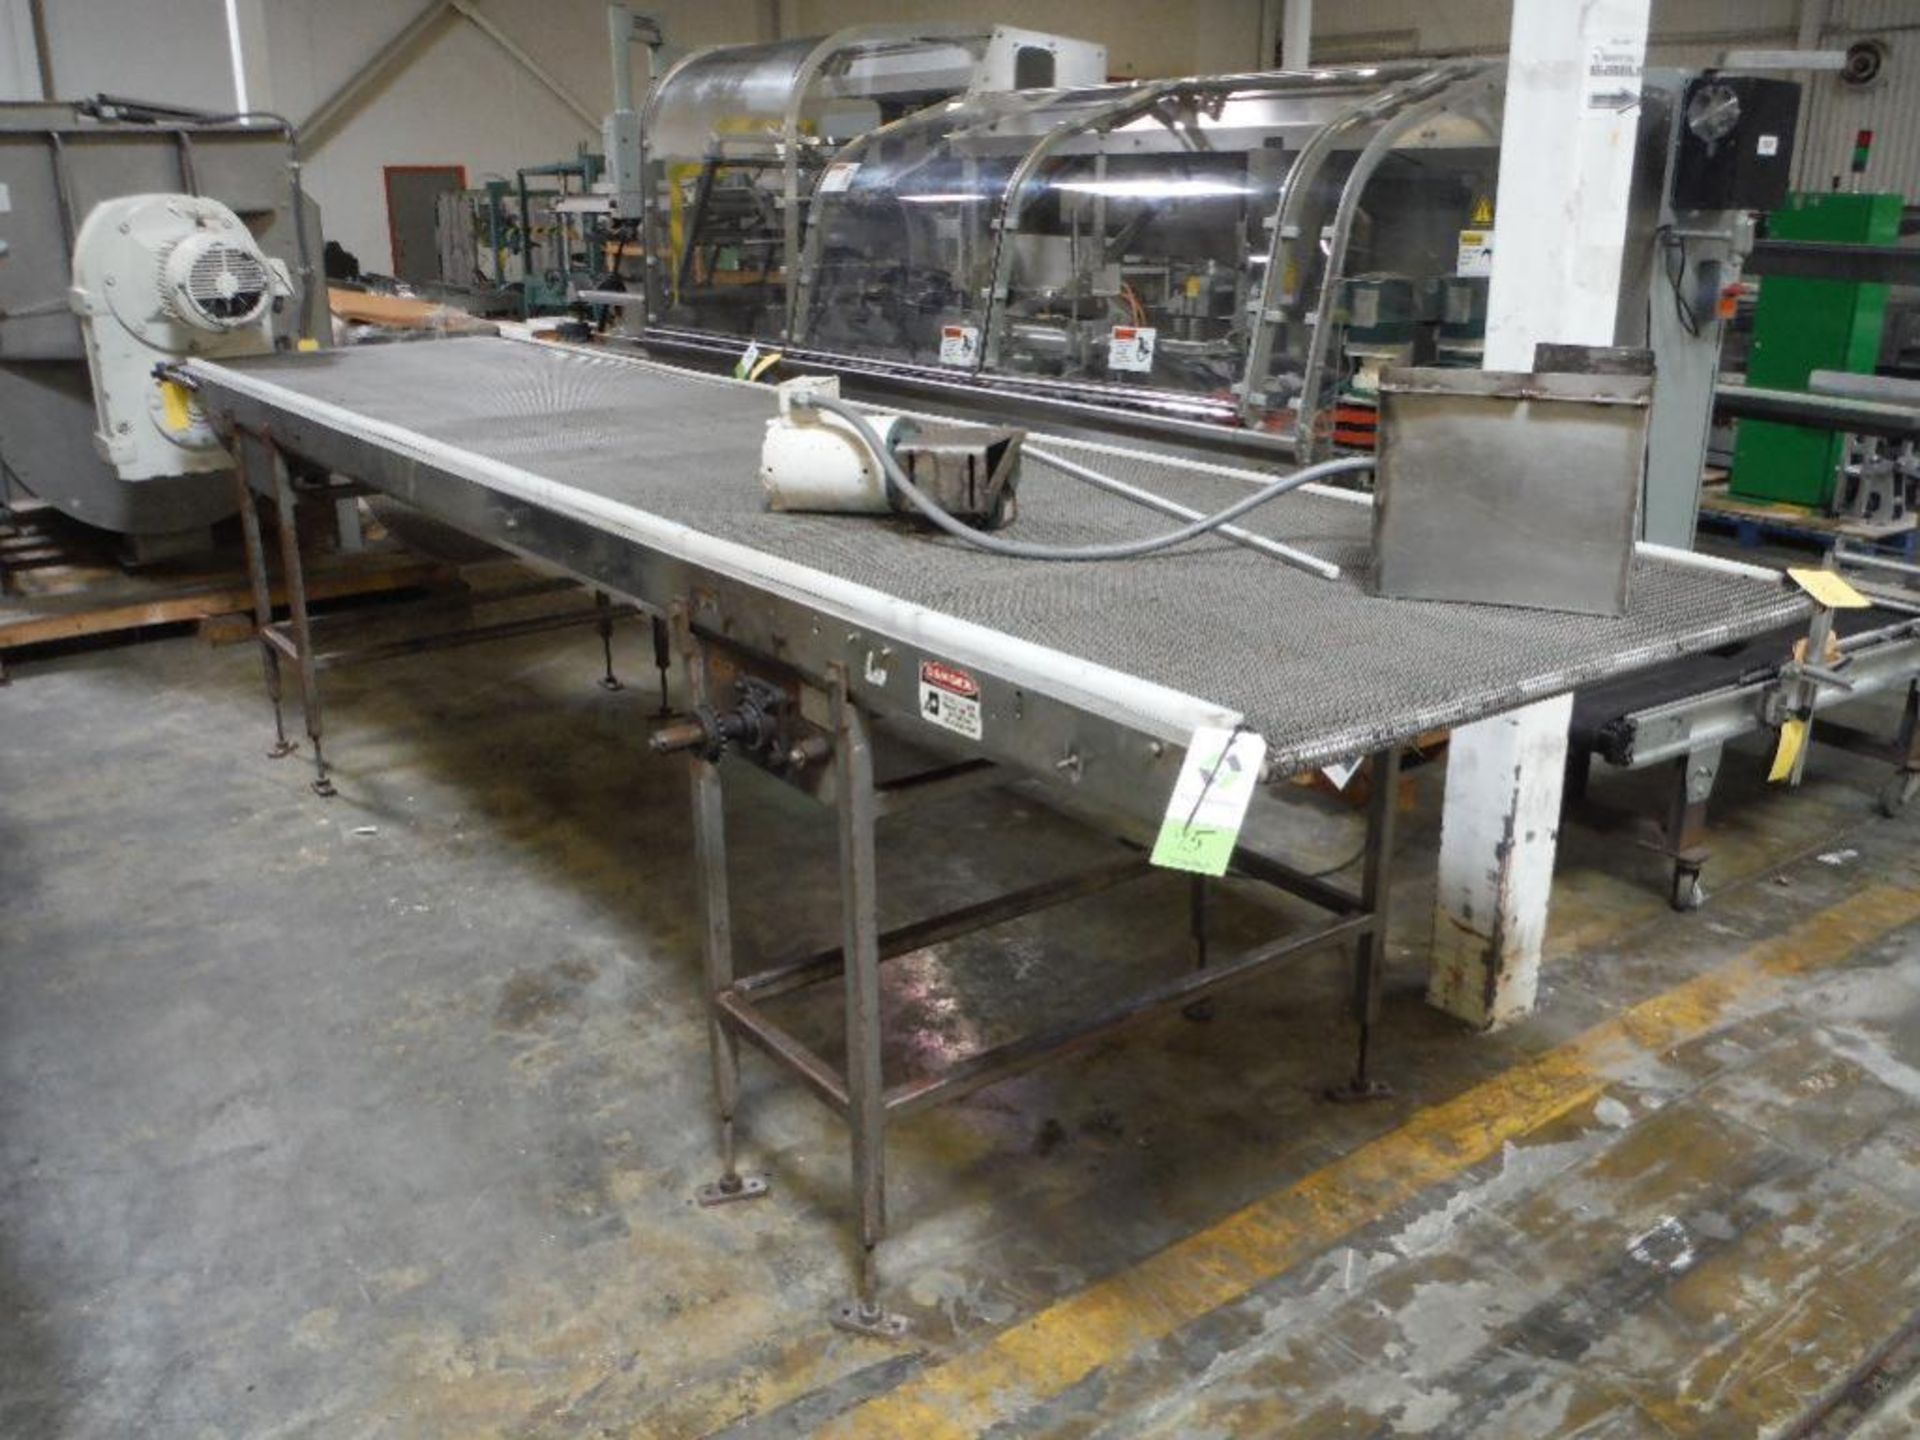 Mesh belt conveyor, 200 in. long x 43 in. wide x 46 in. tall, SS frame, carbon steel legs, motor and